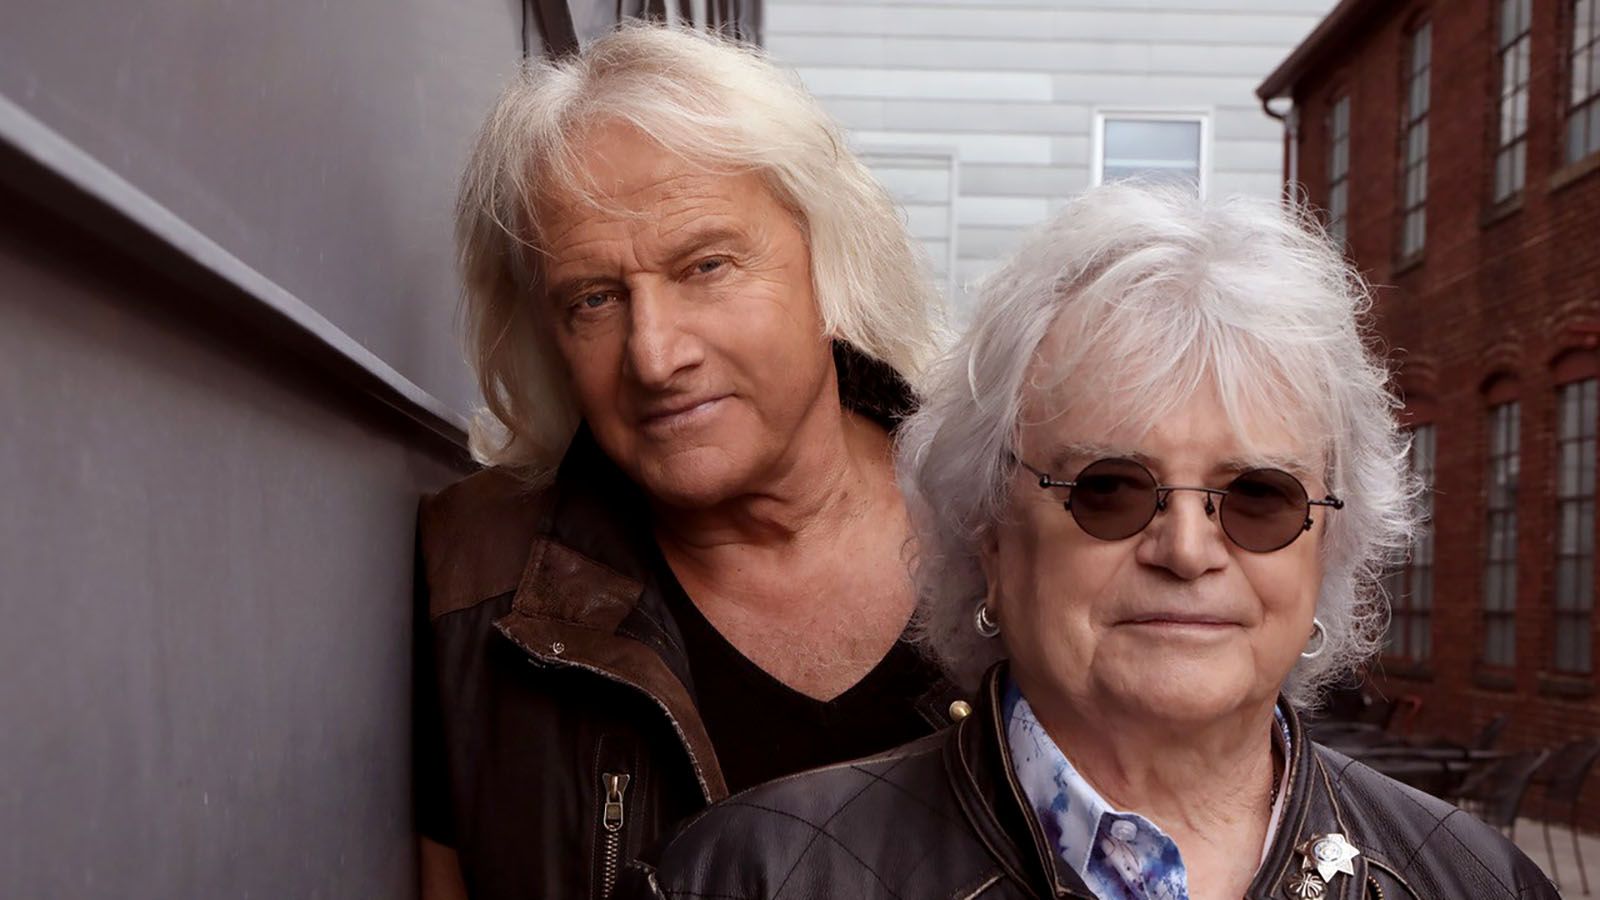 Air Supply will be at Honeywell Center in Wabash on Saturday, July 29.